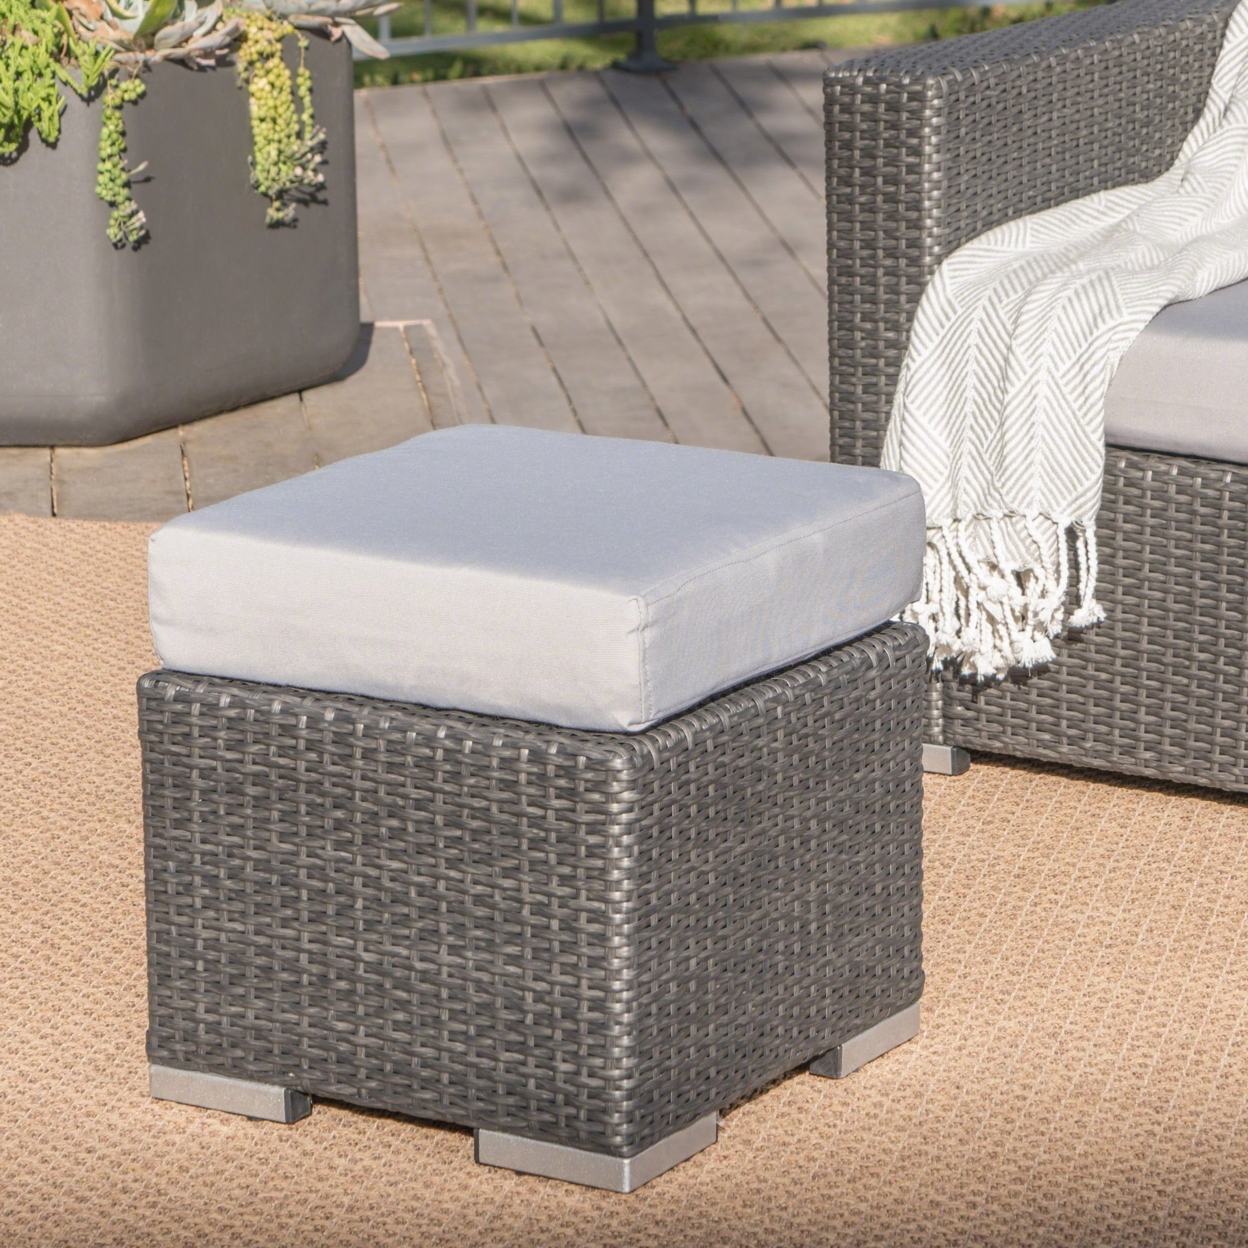 Santa Rosa Outdoor 16 Inch Wicker Ottoman Seat With Water Resistant Cushion - Gray/silver, Set Of 2